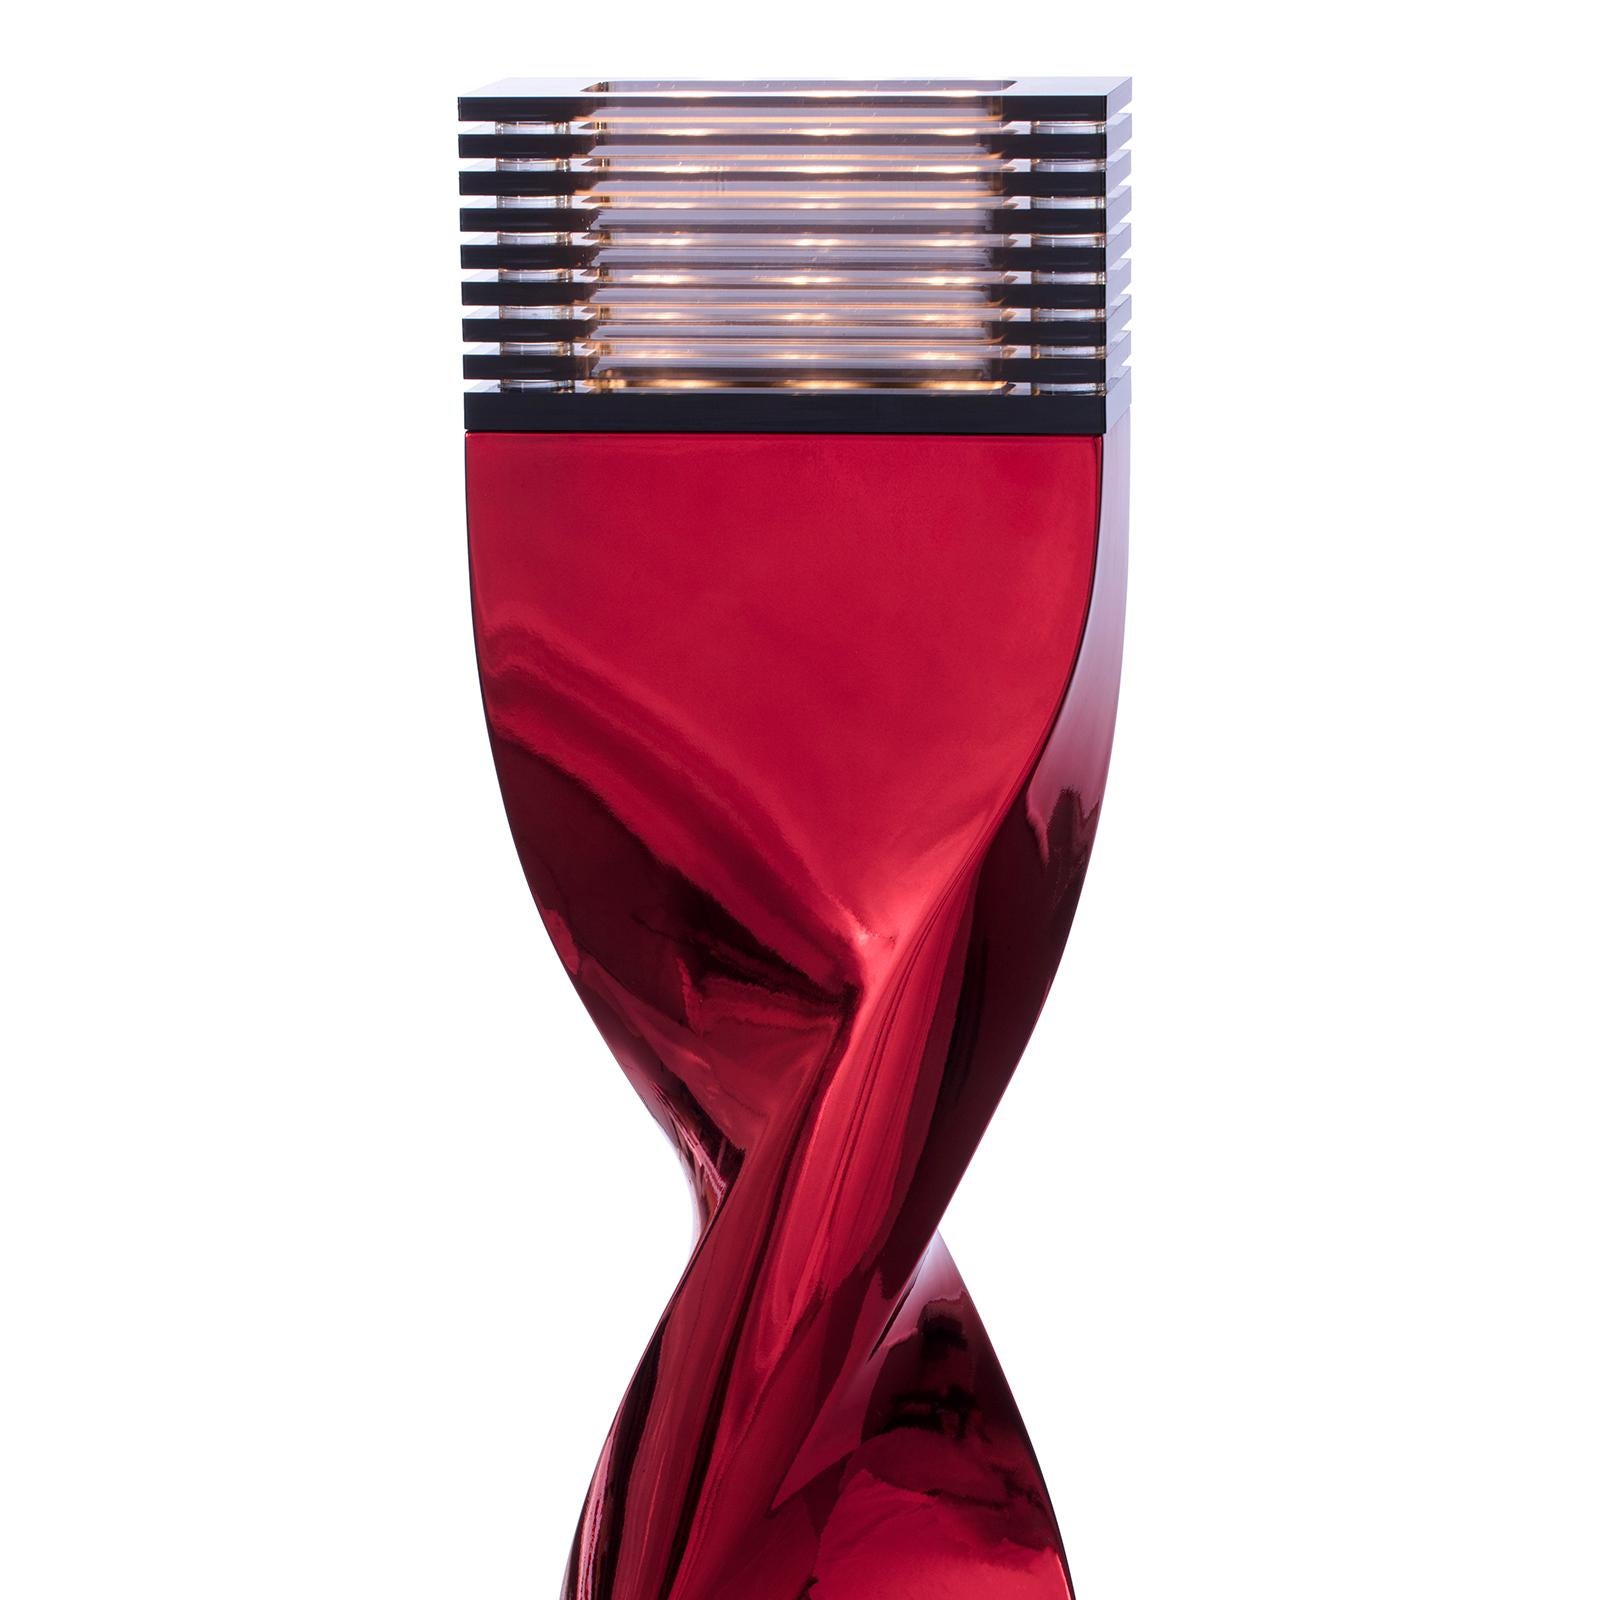 Table lamp bow tie Alu red extra large with structure in casted aluminium
in crafted red chrome finish. With altuglass lamp diffuser at the top.
3 Led bulbs, lamp holder type GU10 socket, with dimmer. Bulbs not
included. Weight: 7 kg. Available